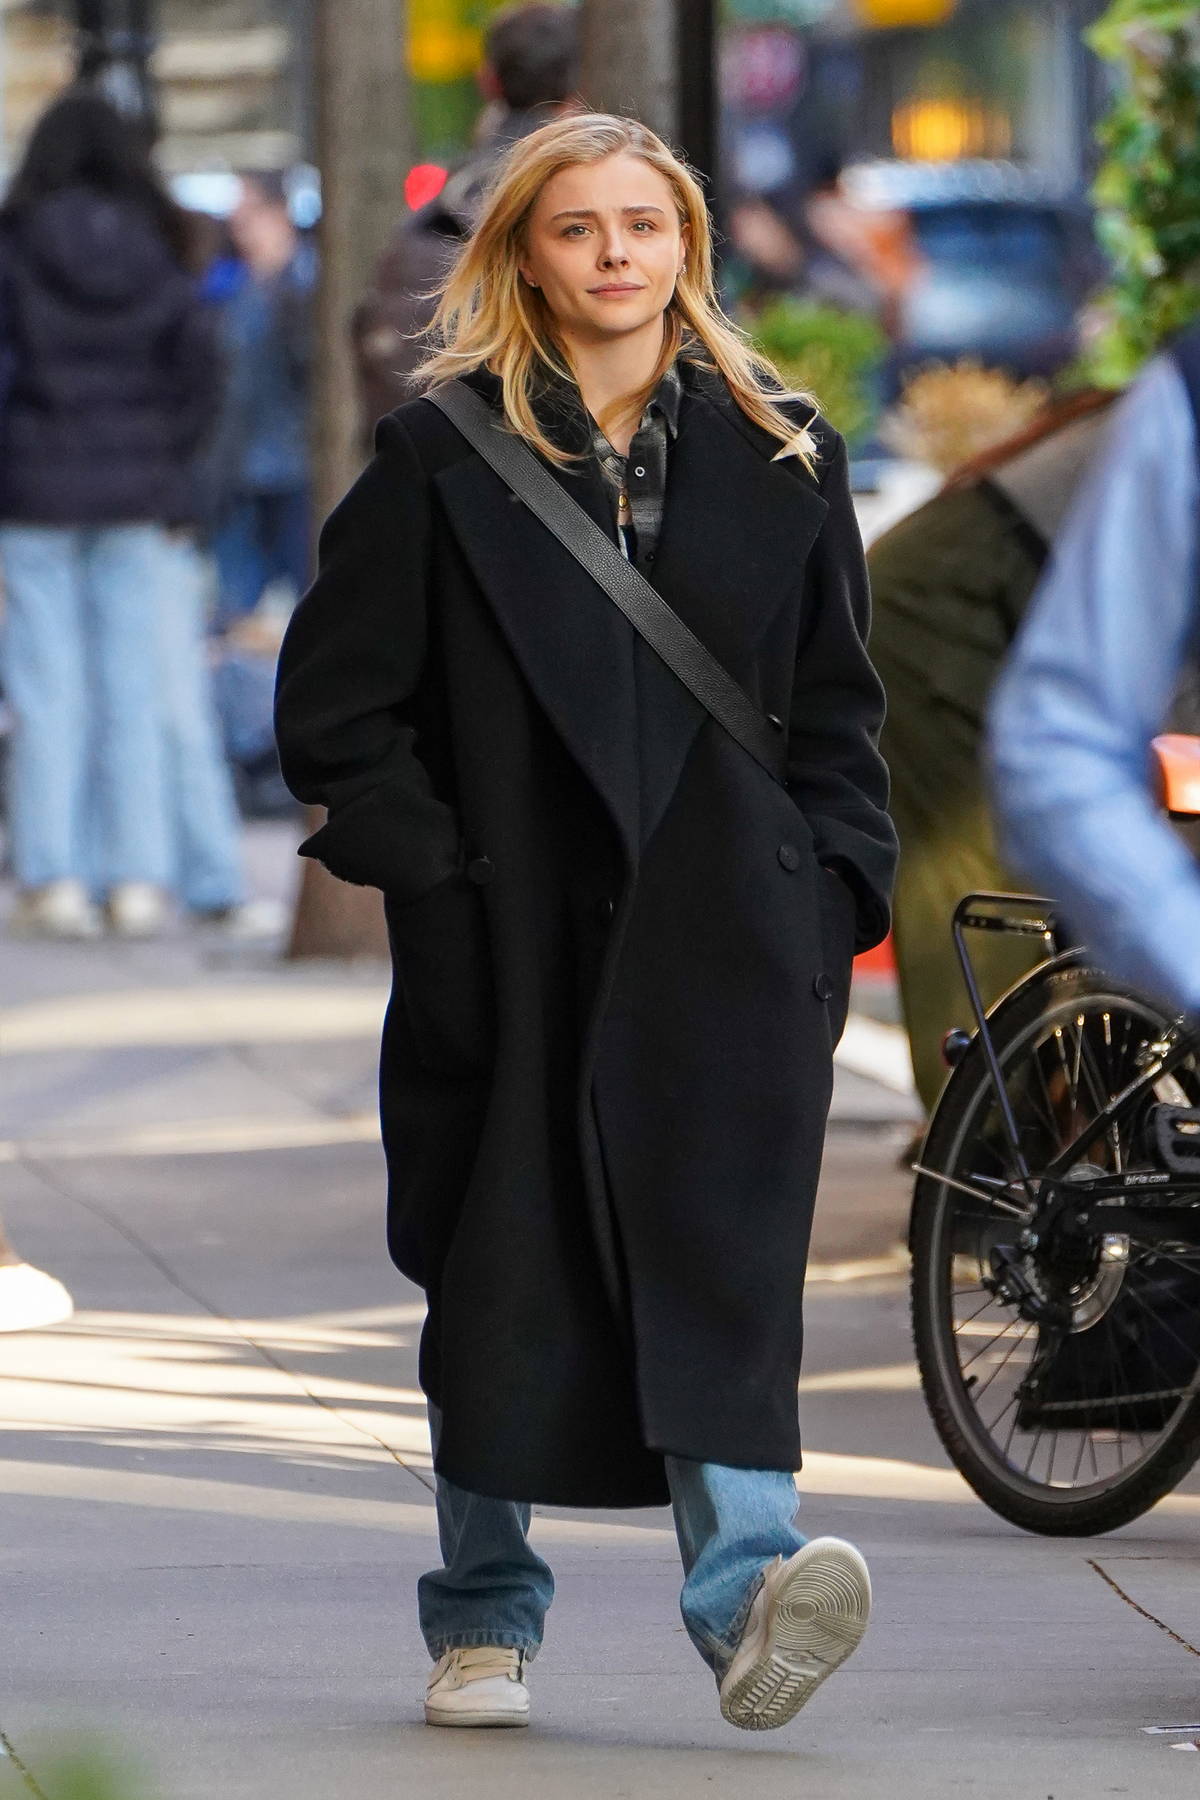 Chloe Grace Moretz wears a black trench coat and jeans while out